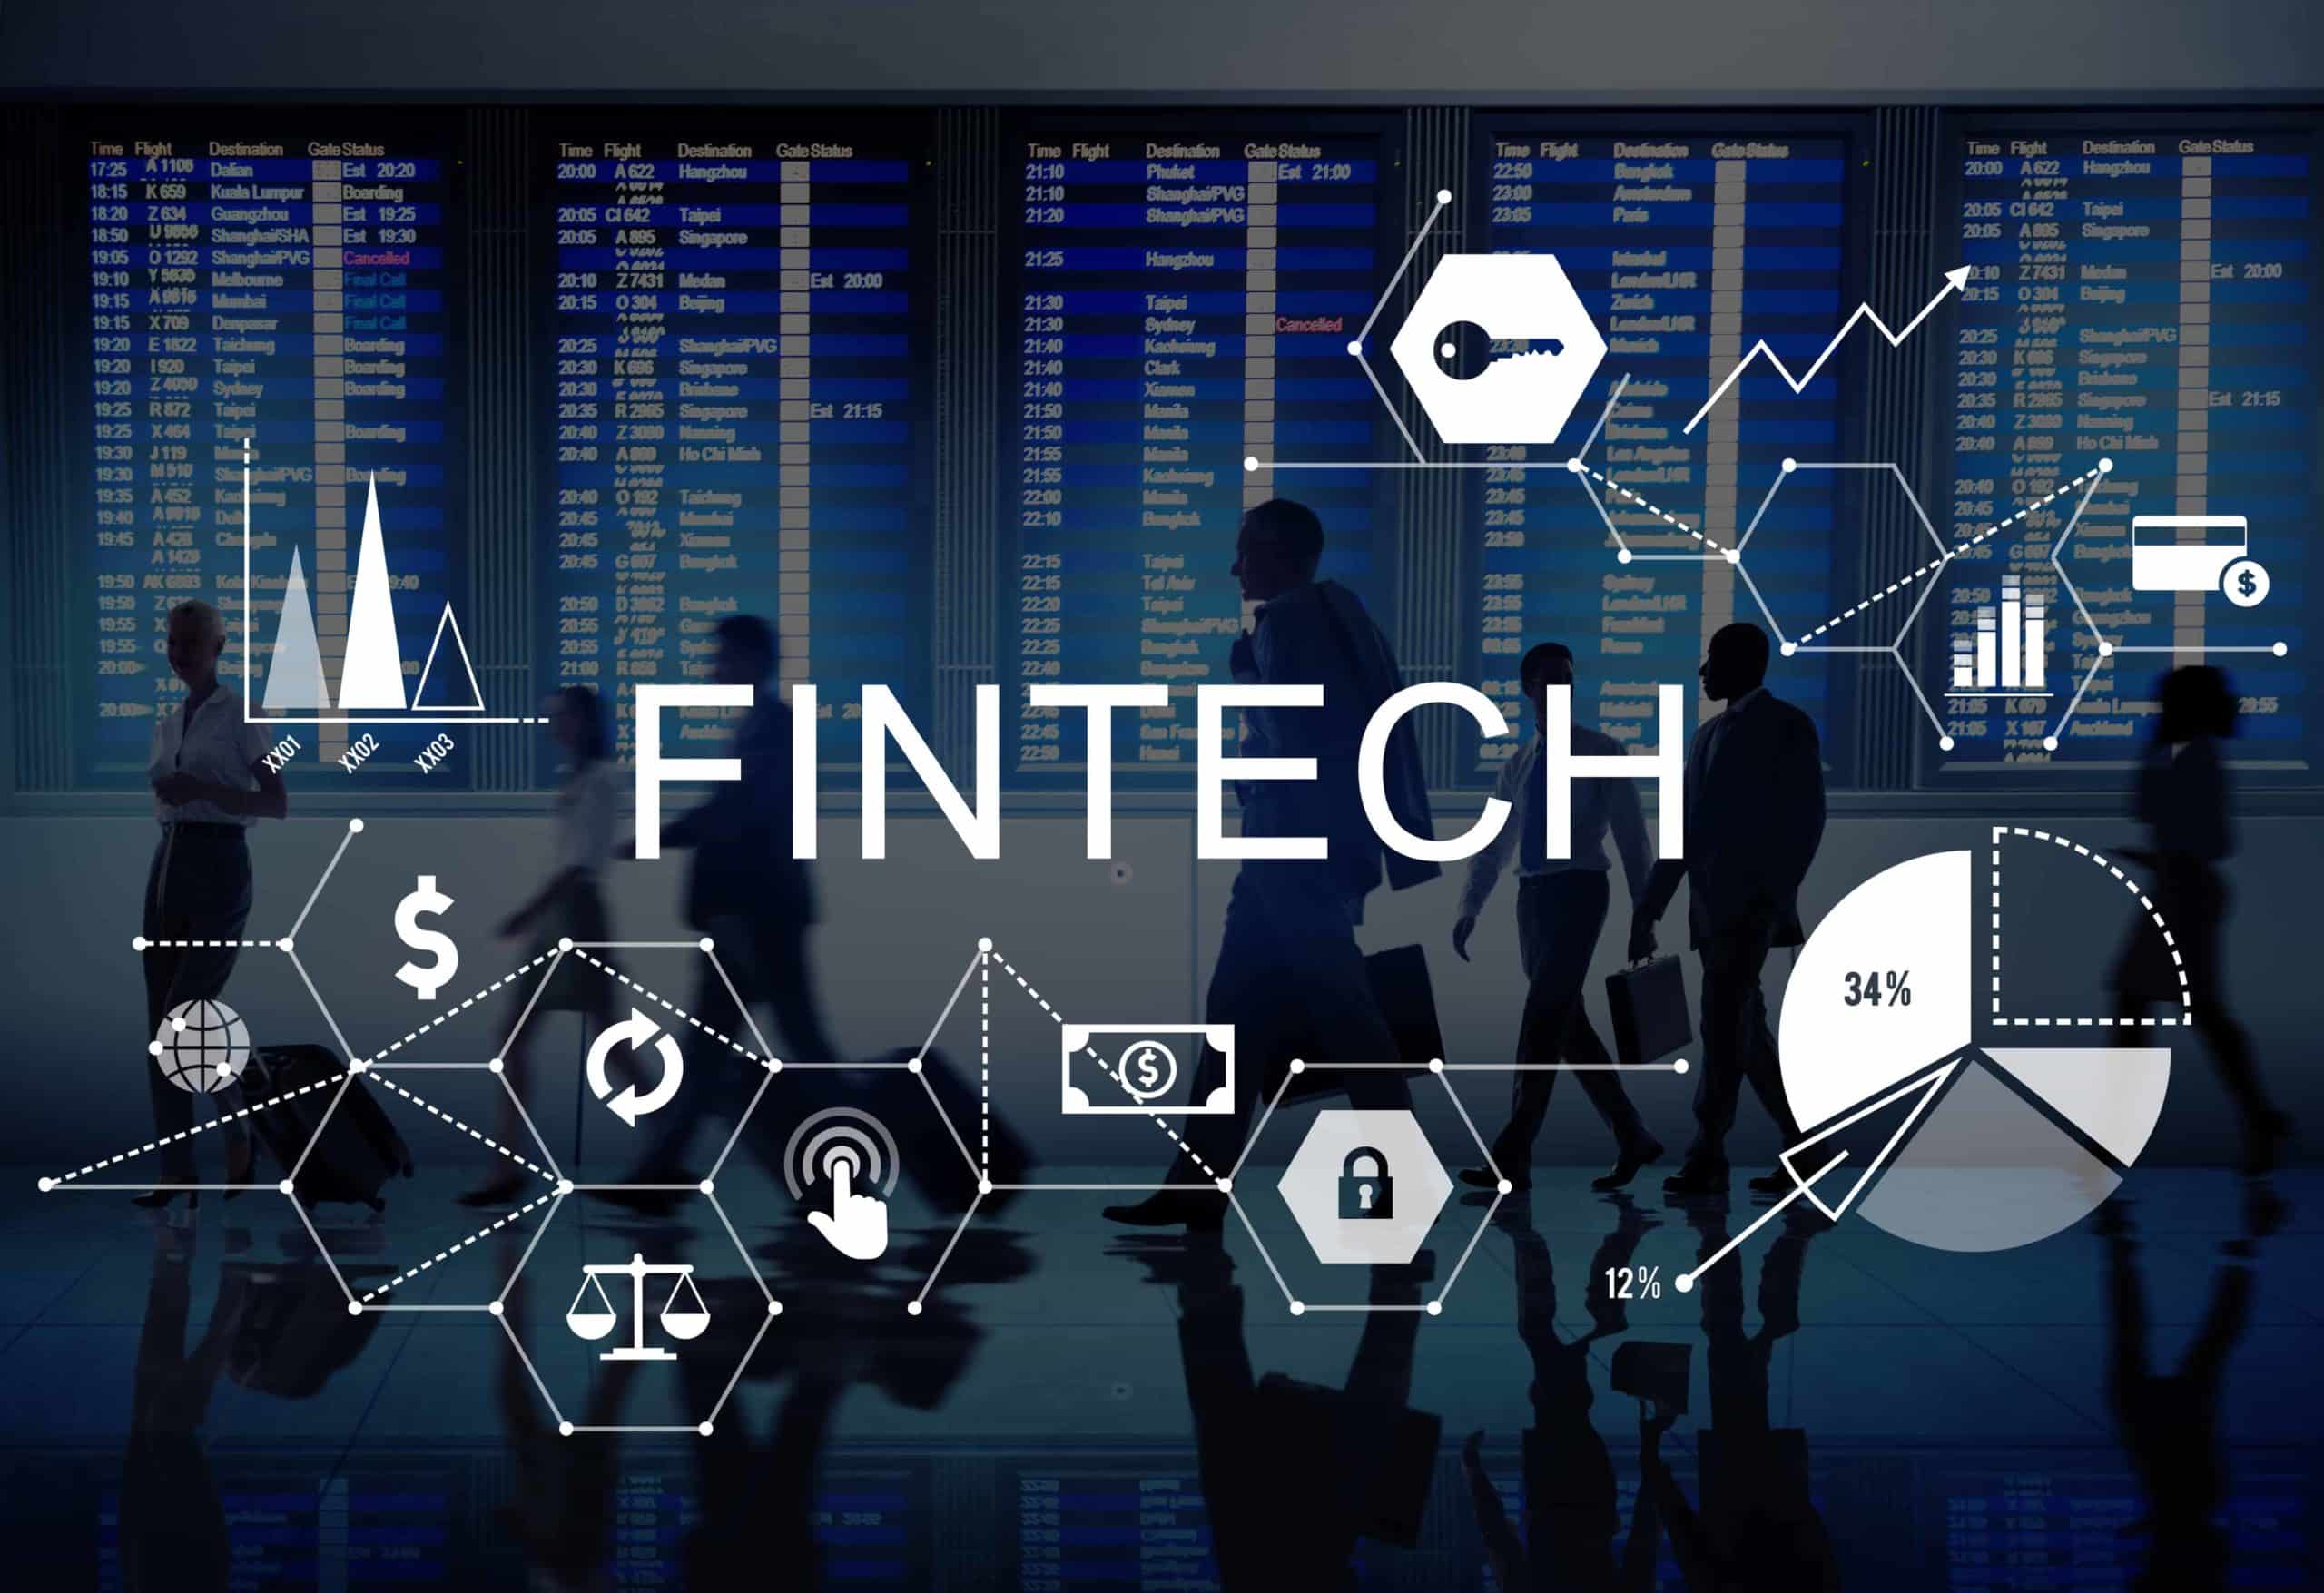 Asia Fuels Fintech Growth Part 1: A Look into the Financial Landscape